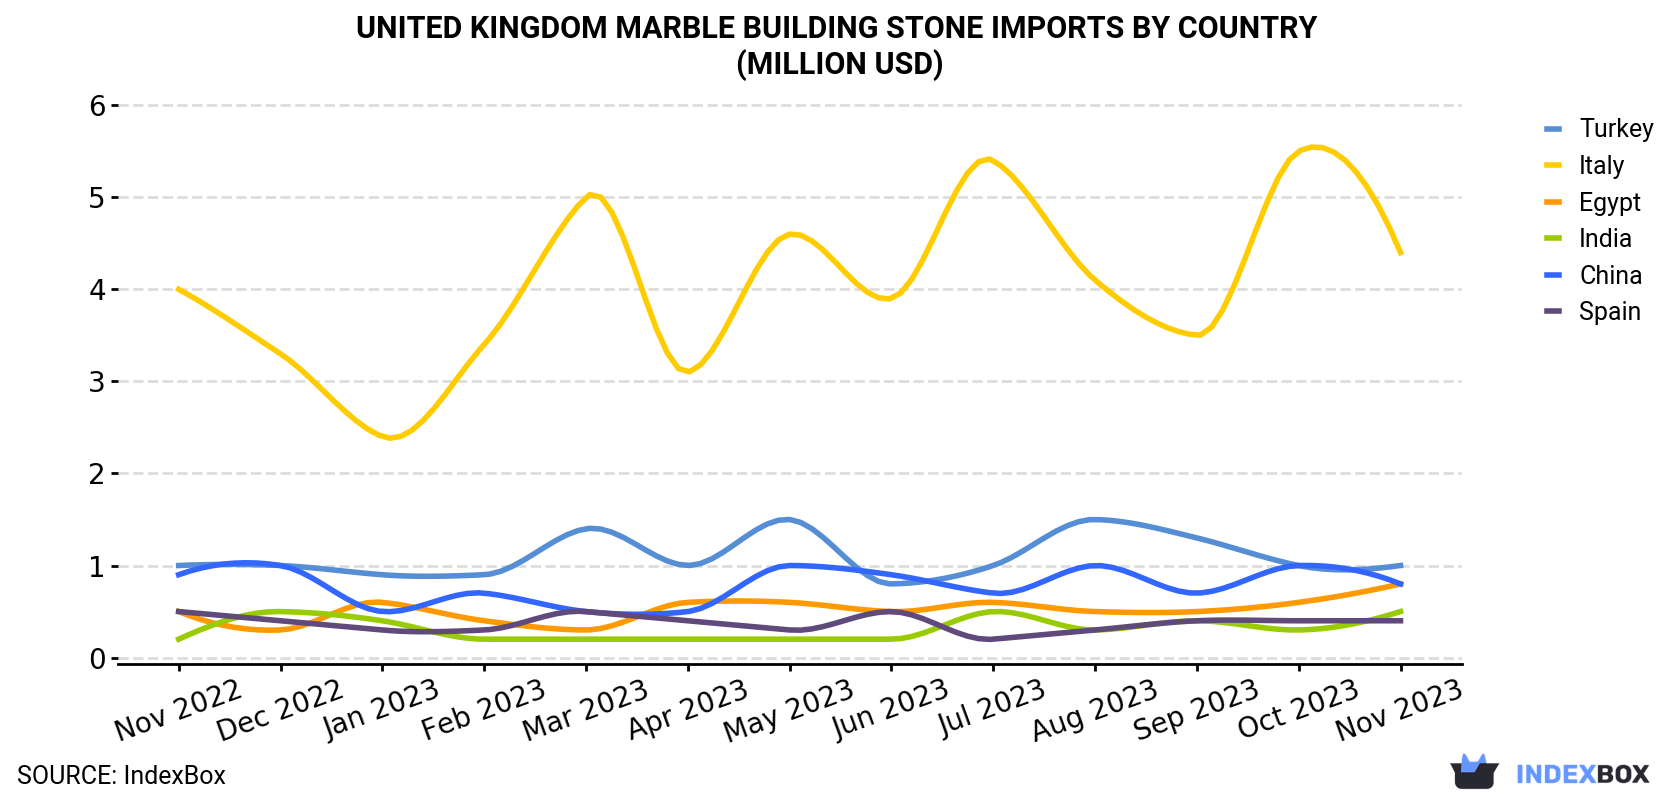 United Kingdom Marble Building Stone Imports By Country (Million USD)